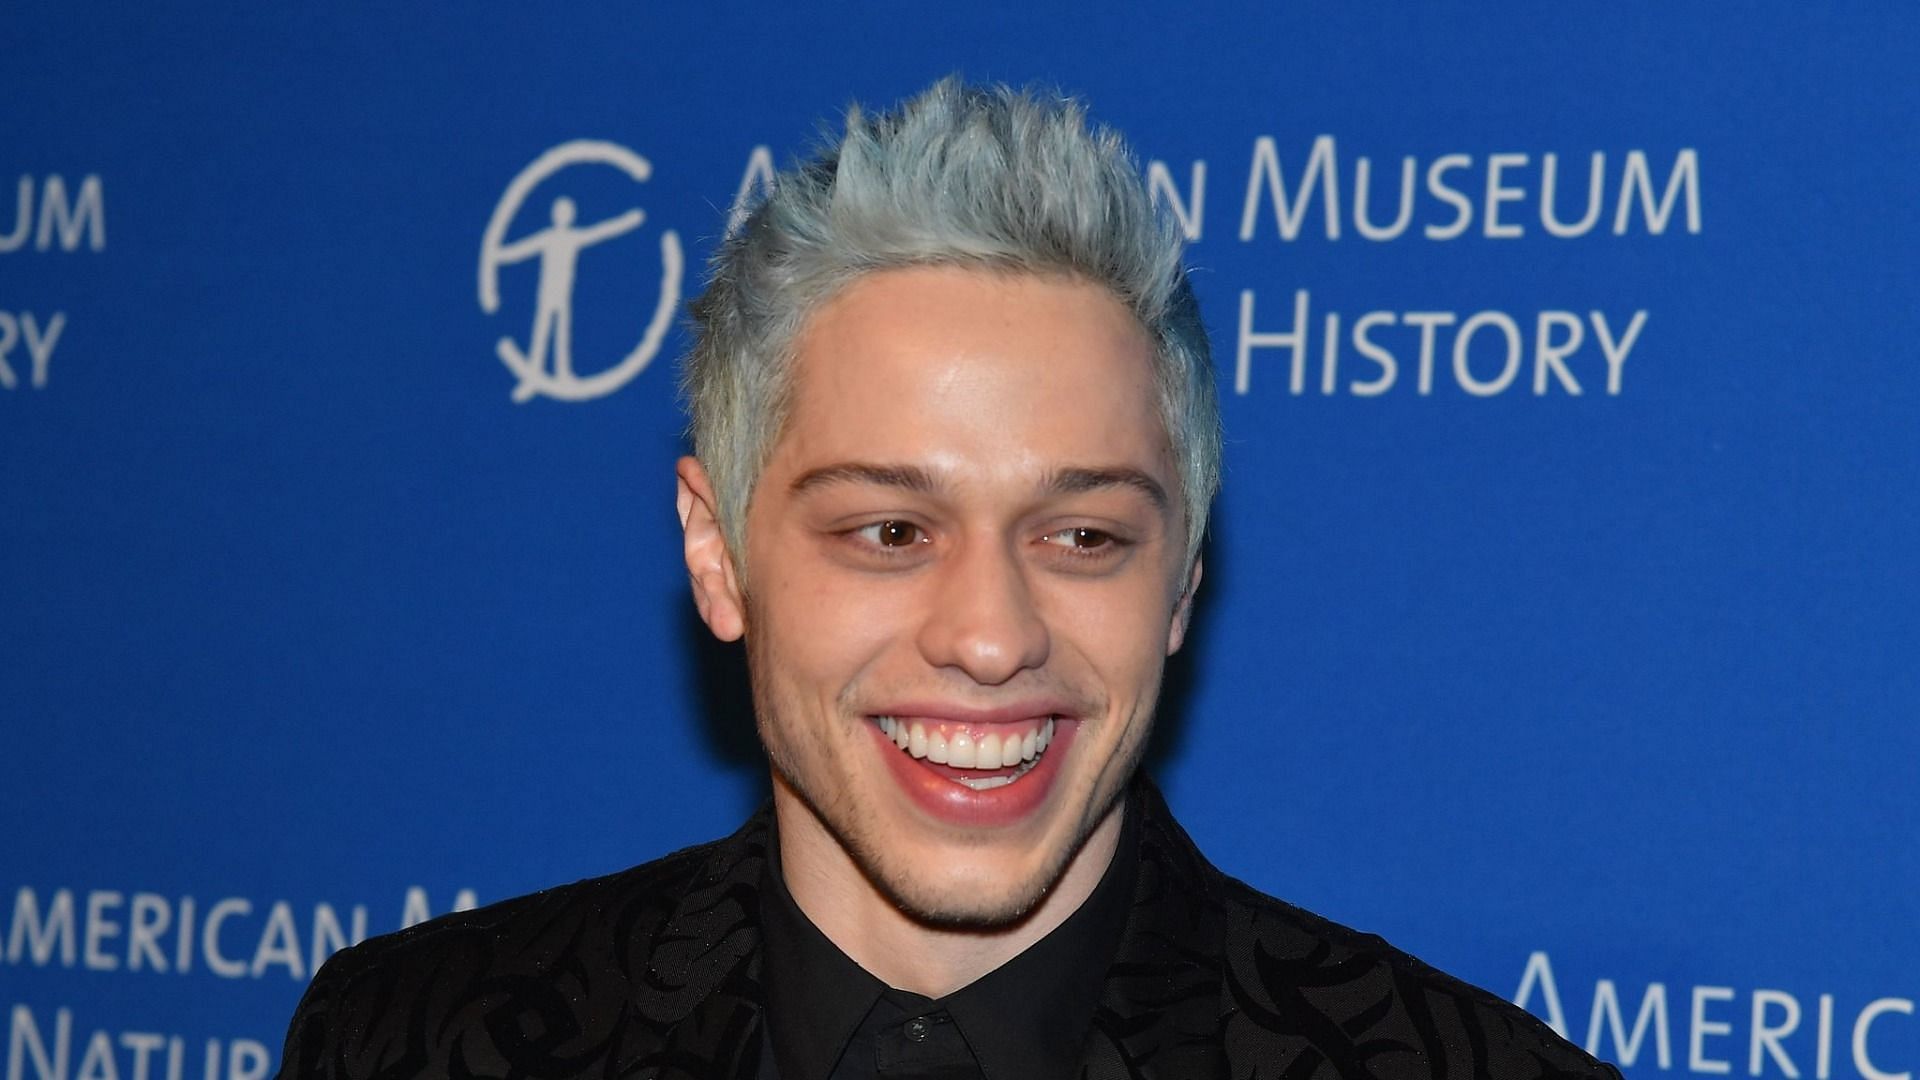 Pete Davidson is no longer going to space (Image via Getty Images)